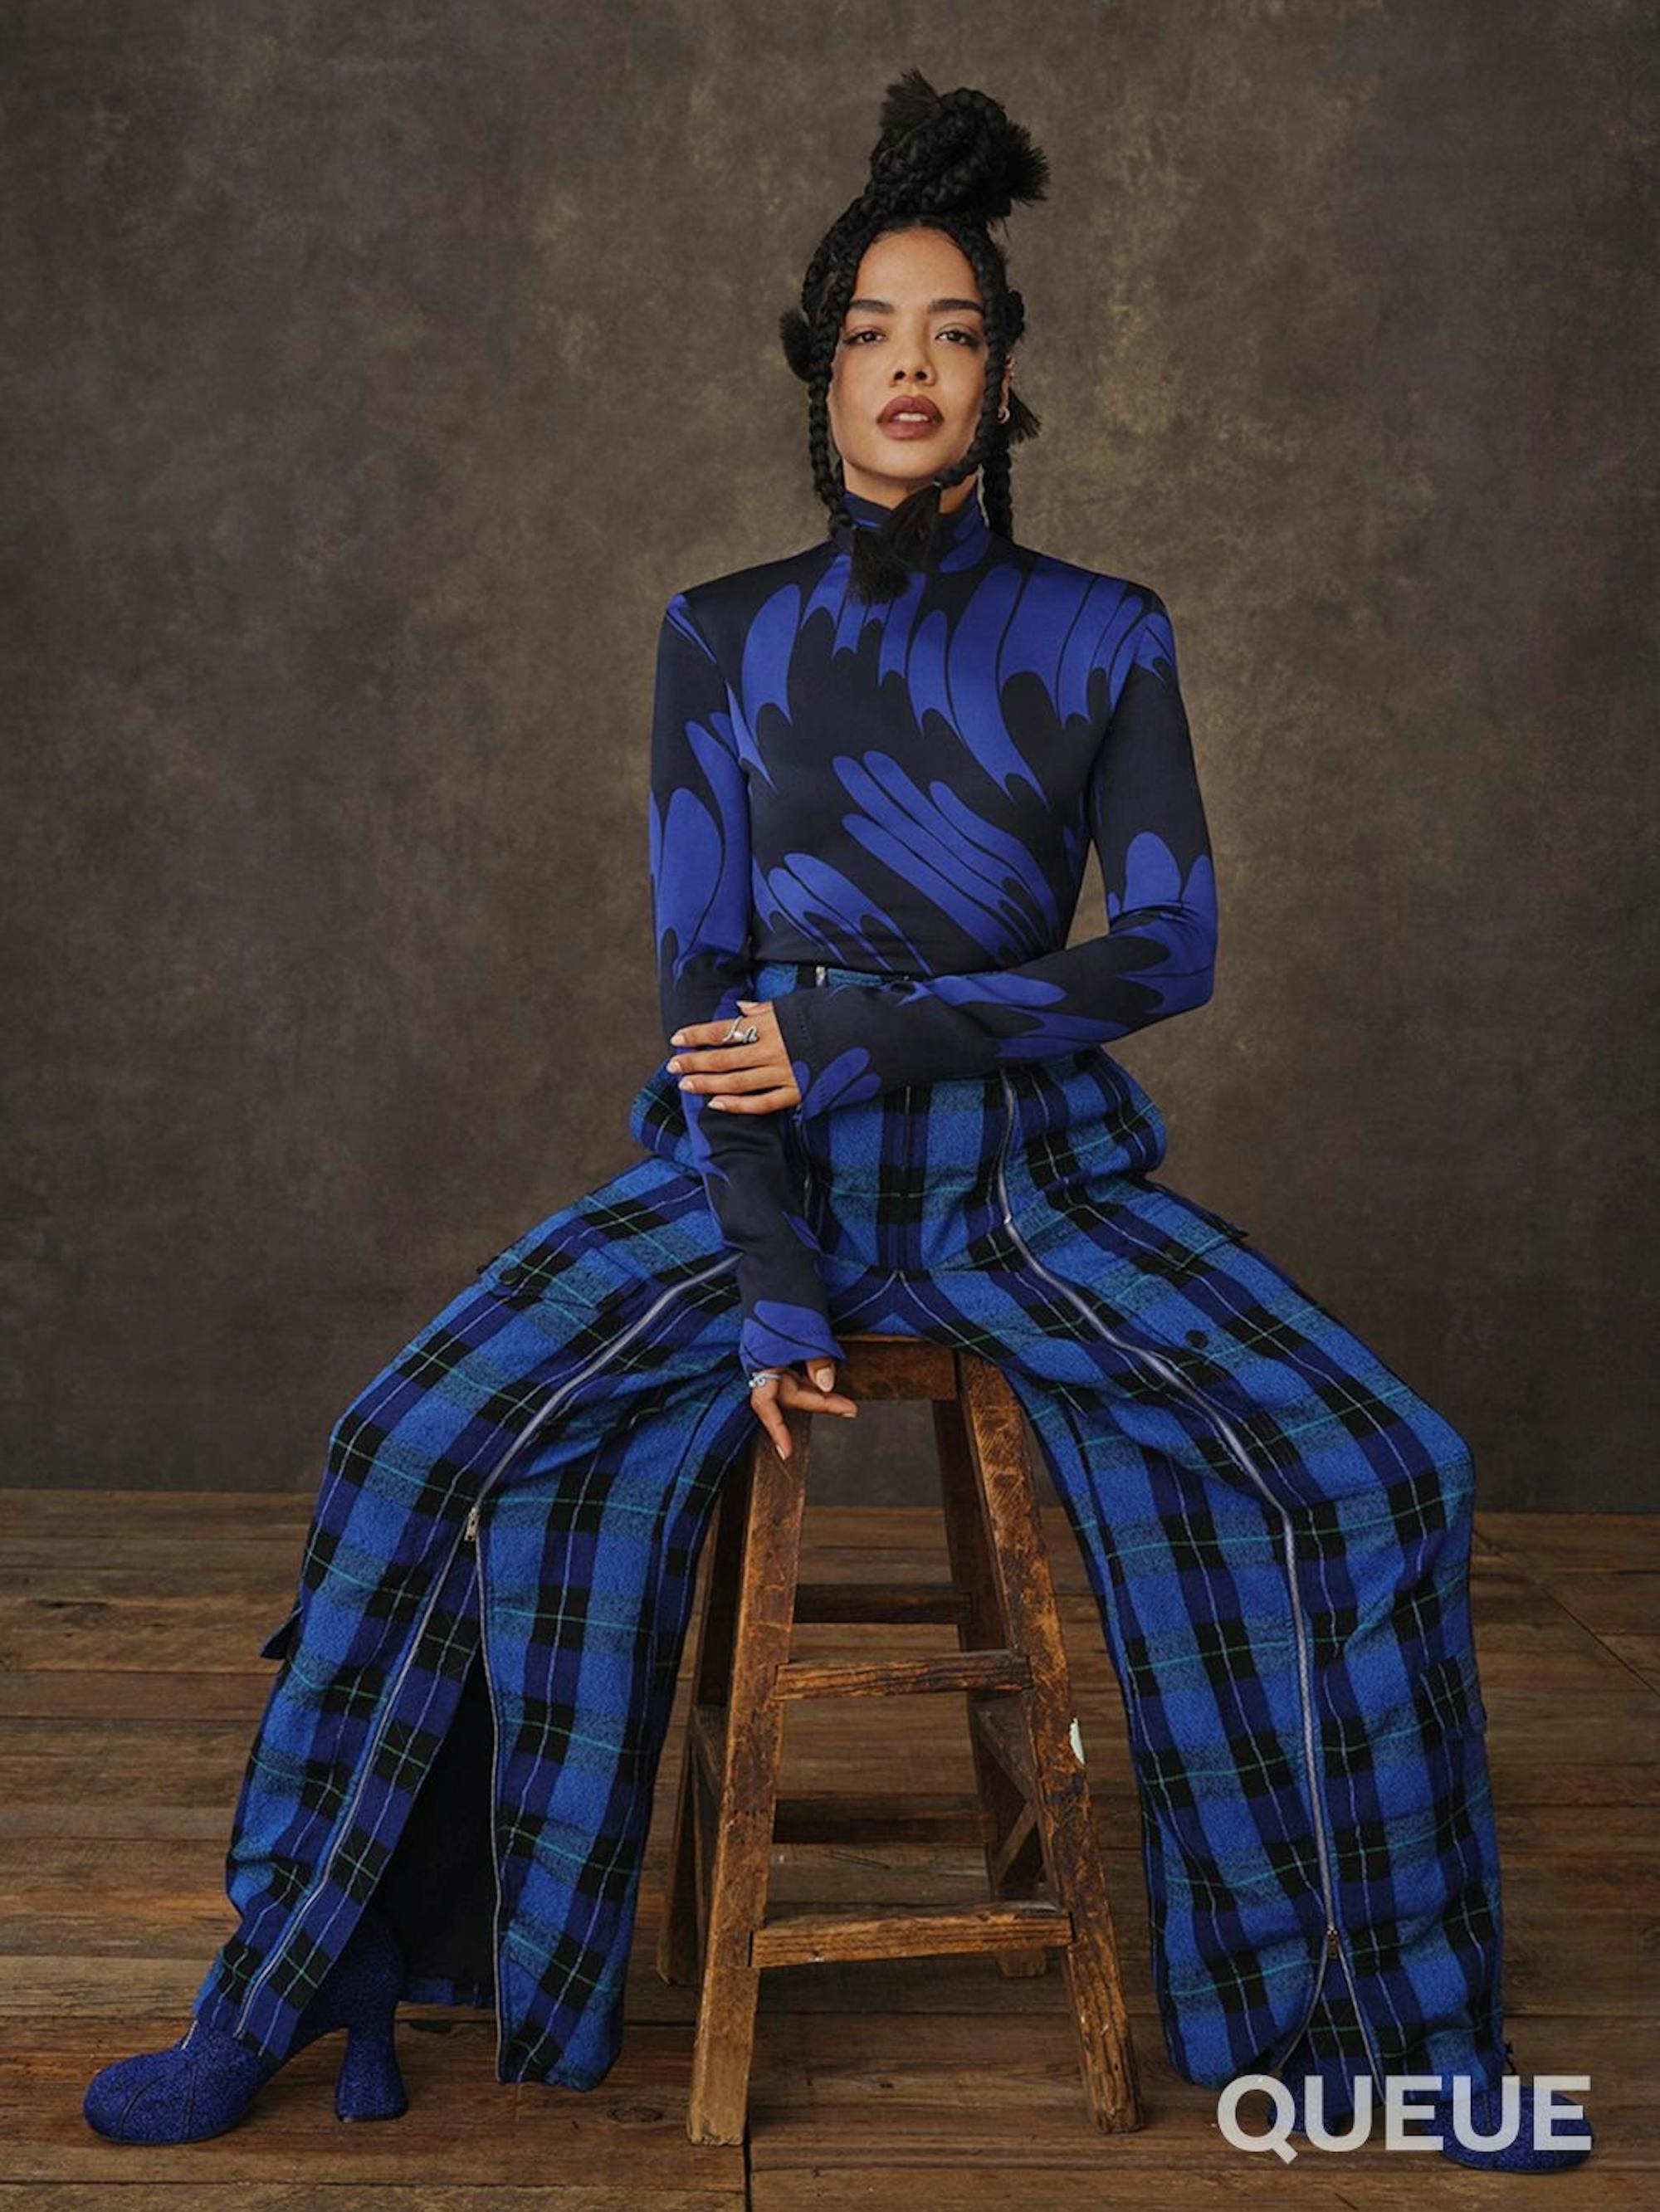 Tessa Thompson wears a blue and black patterned long sleeved turtle neck, and blue-green-black plaid pants. Blue heeled boots peep out from beneath her pants.